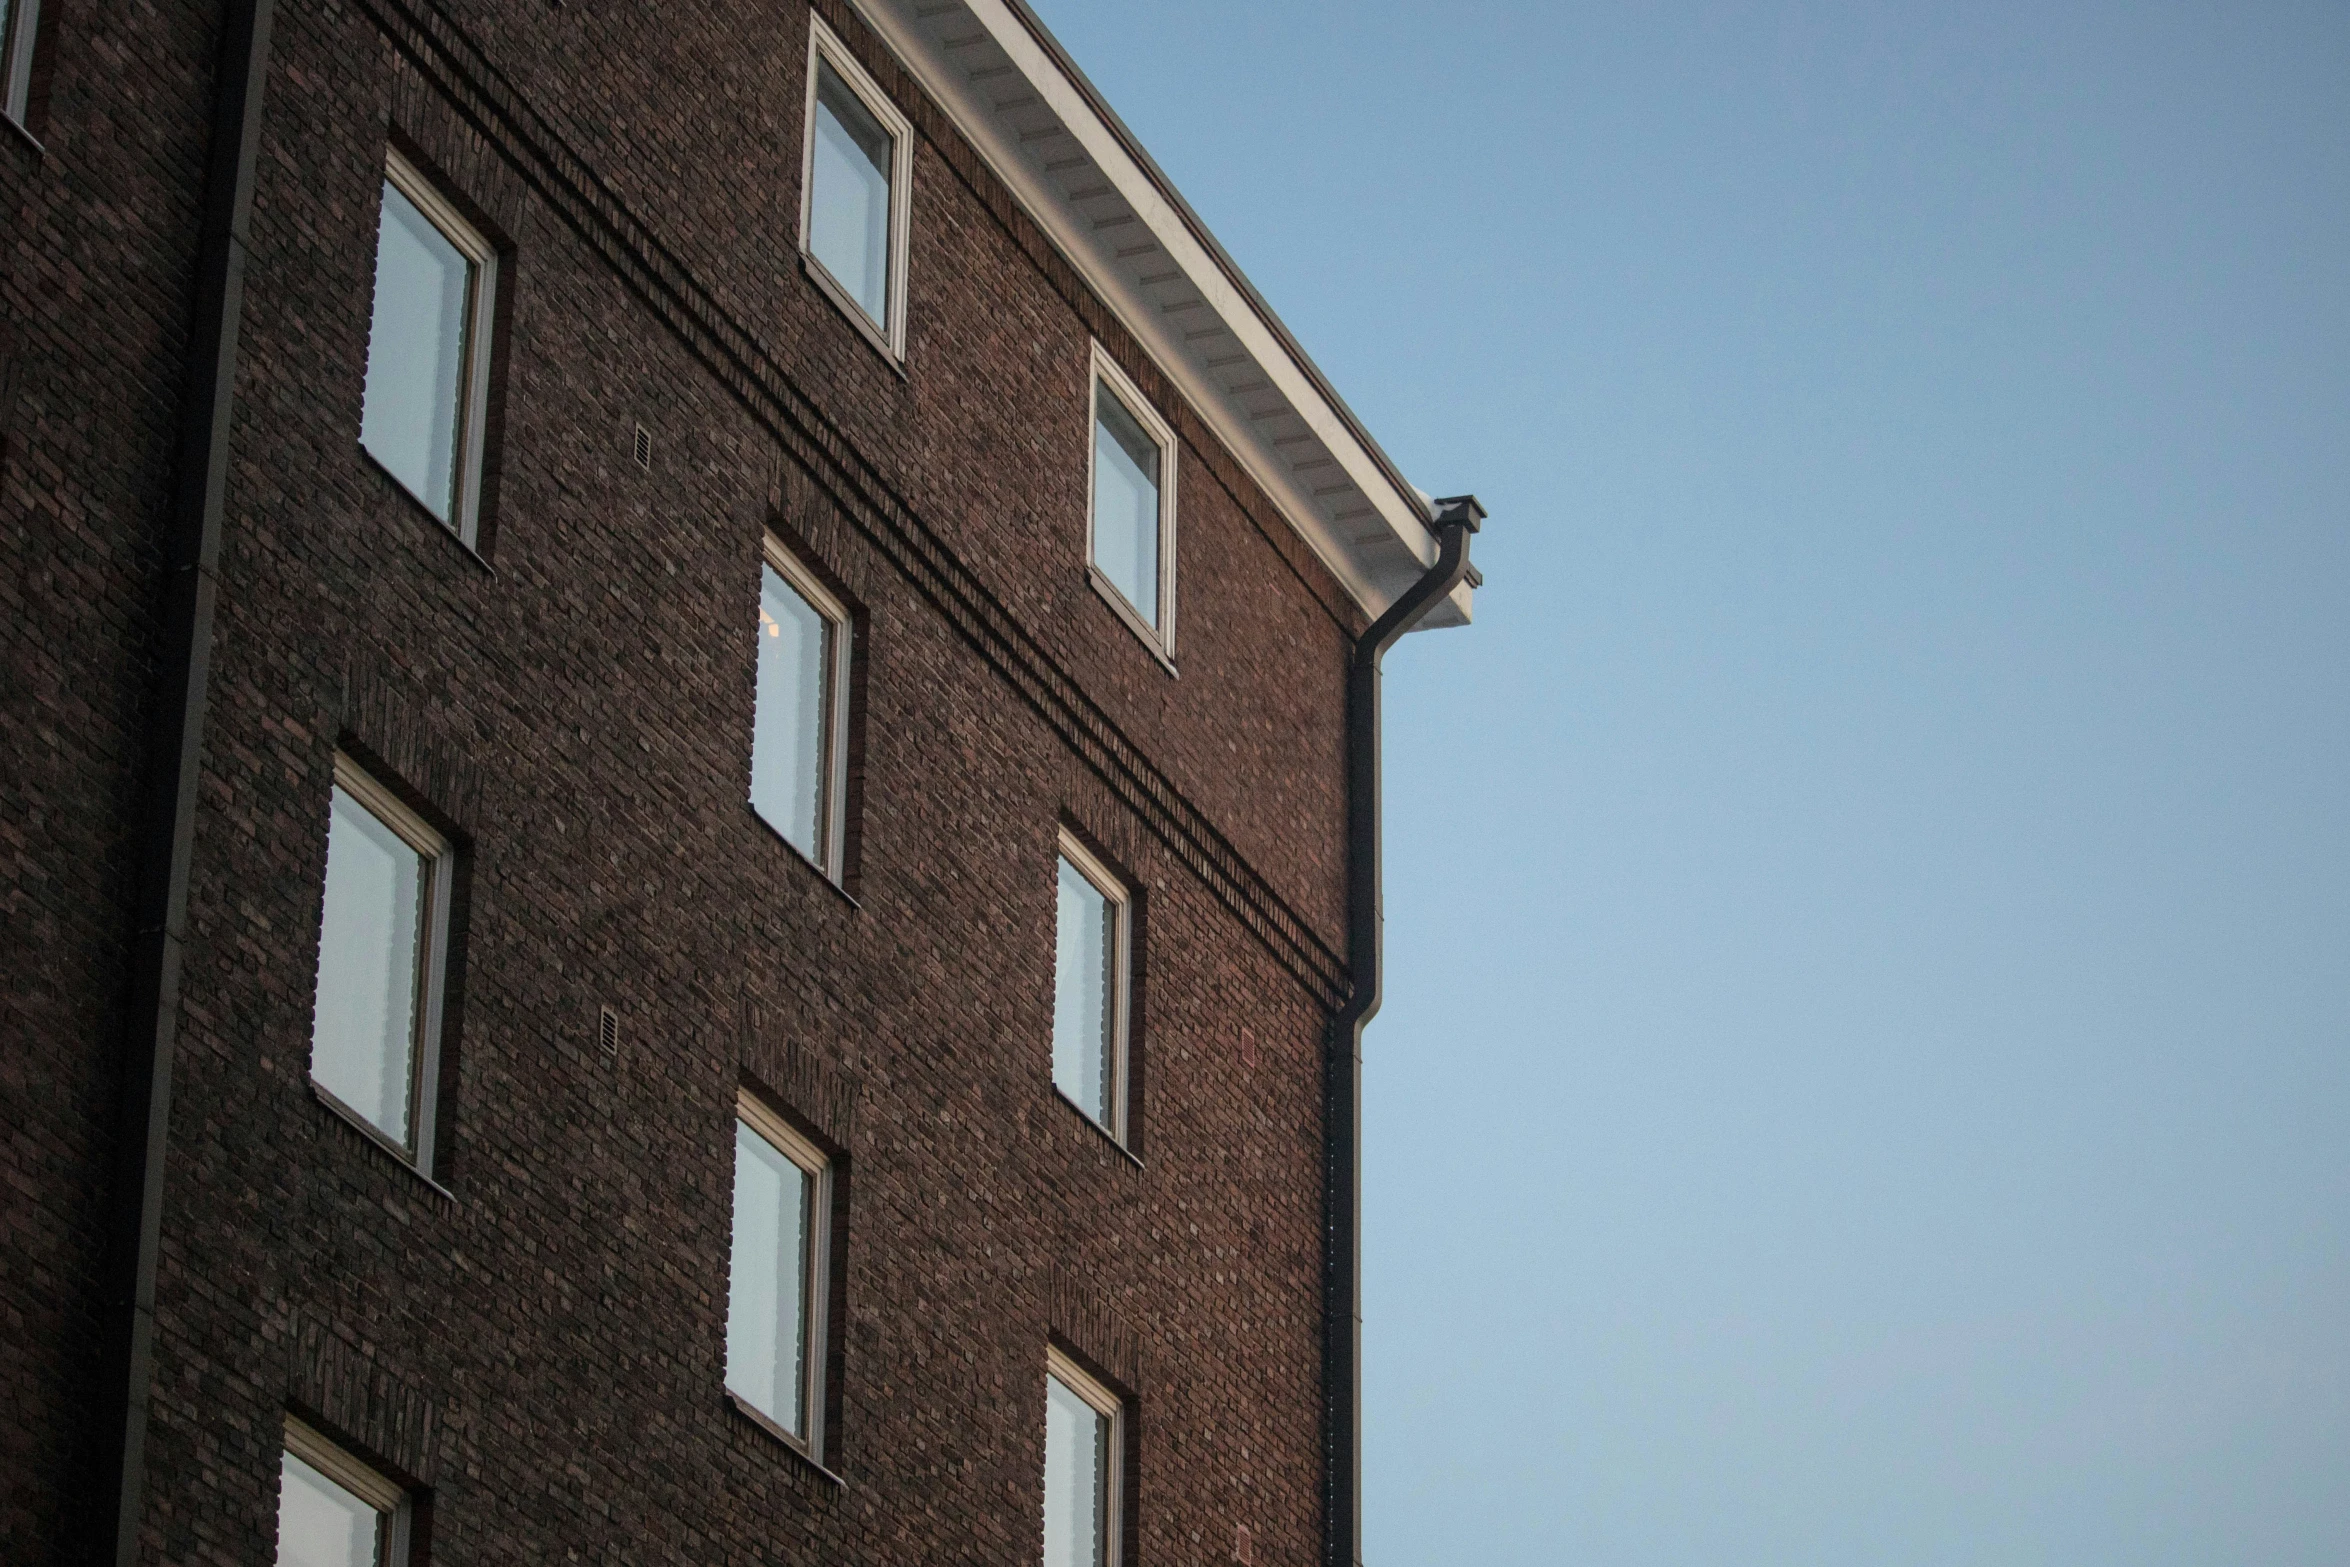 an airplane flying above the windows on a very tall brick building